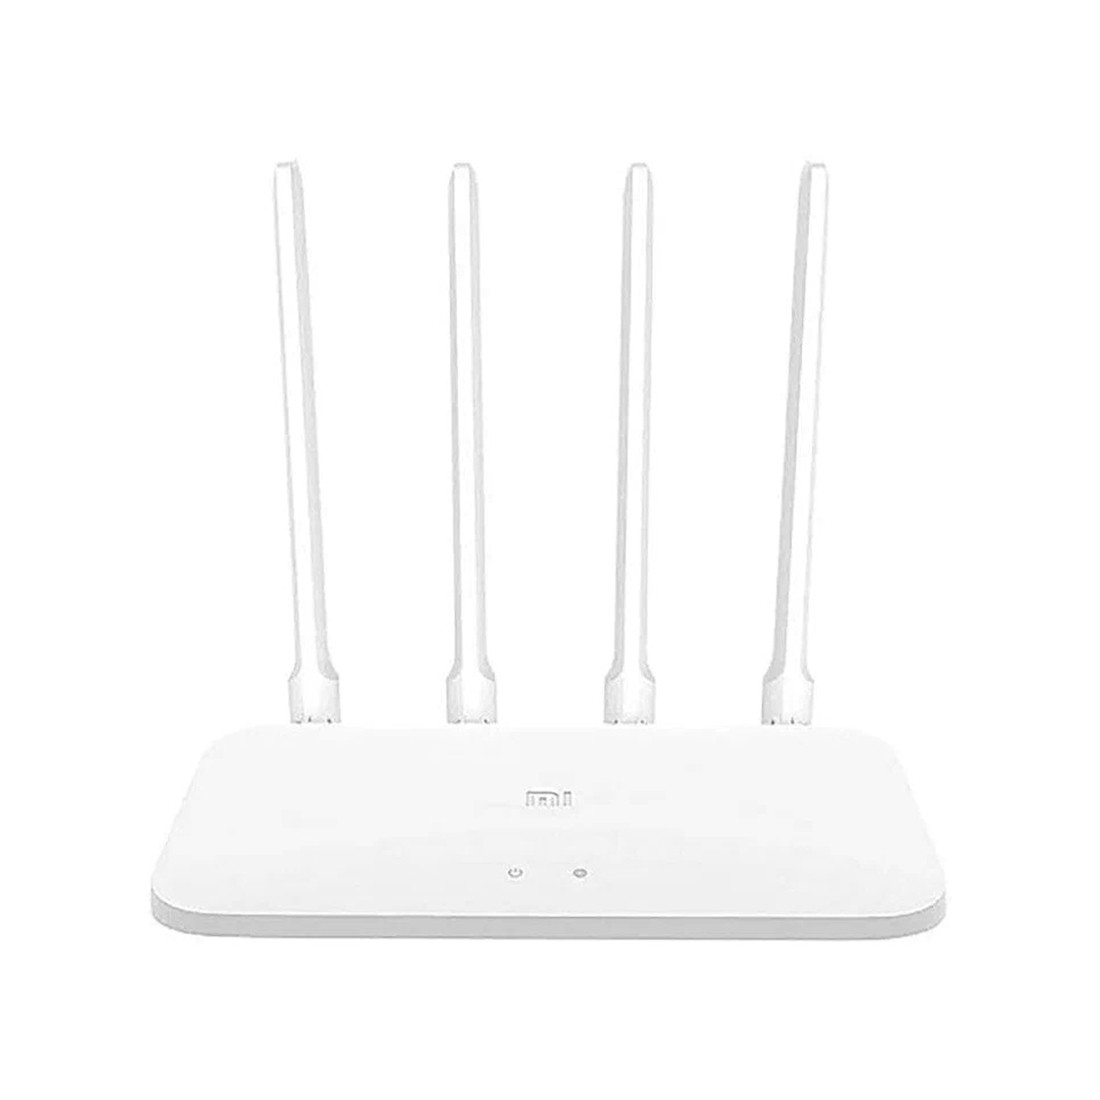 Маршрутизатор Xiaomi Router AC1200 - фото 2 - id-p112679557